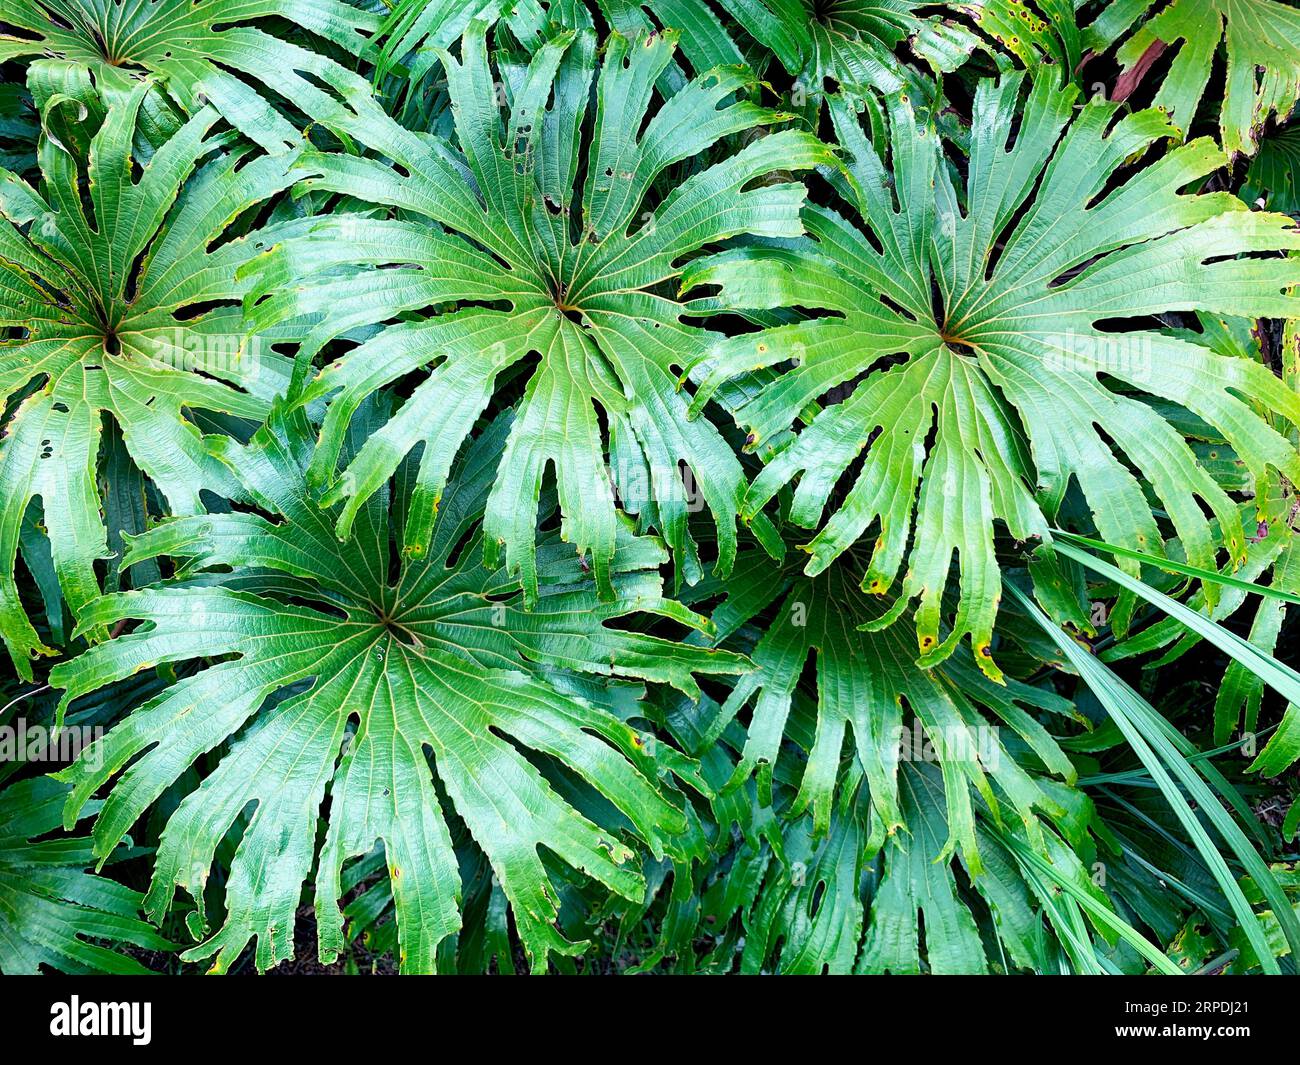 Dipteridaceae, commonly known as umbrella ferns. Dipteris conjugata. Stock Photo